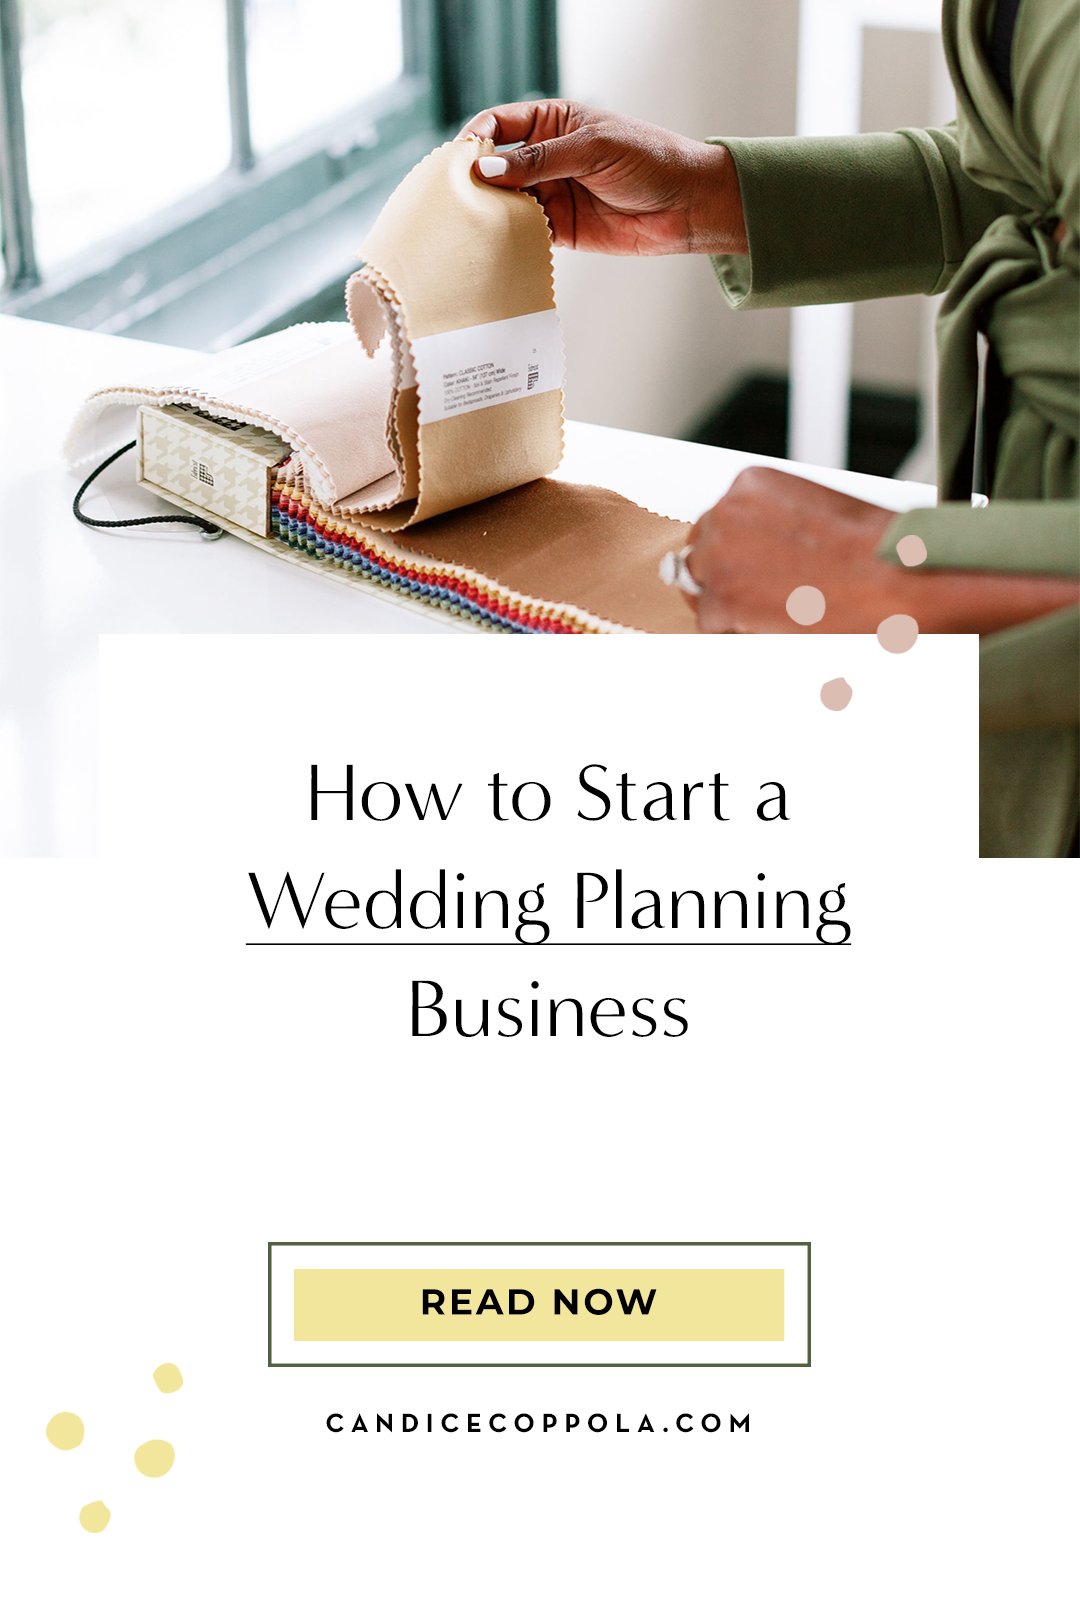 How to Start a Wedding Planning Business